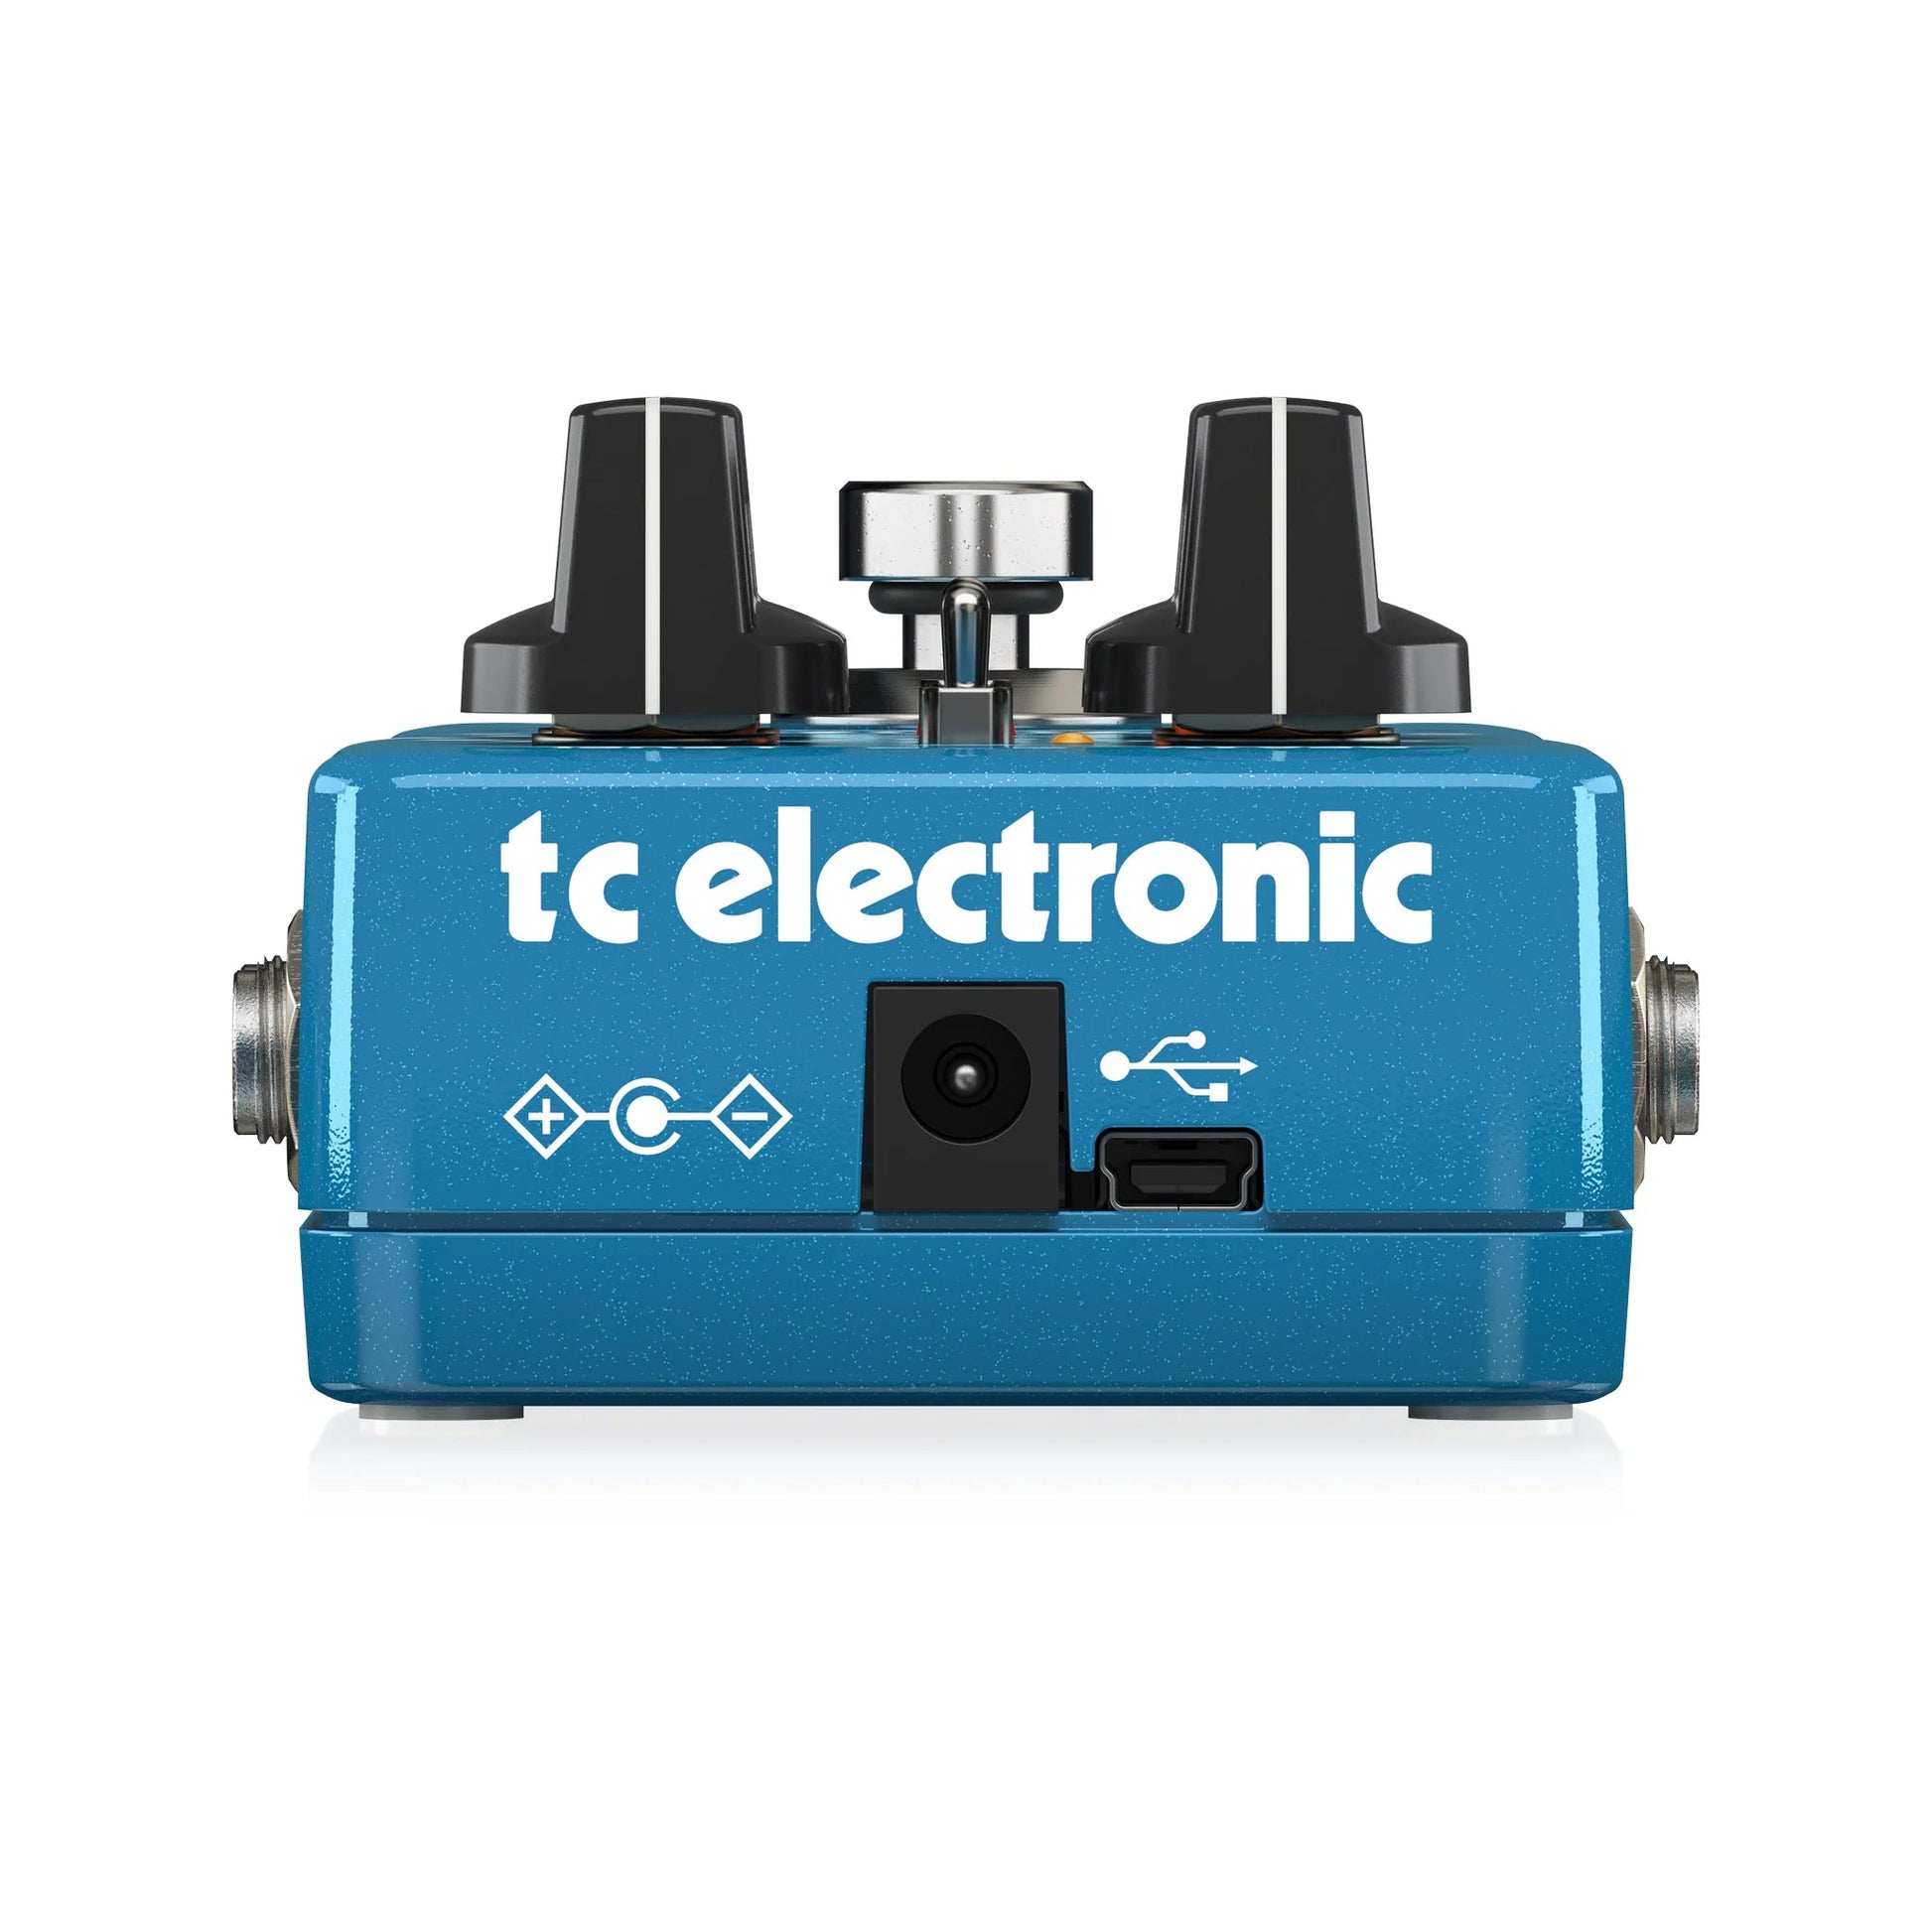 Pedal Guitar TC Electronic Infinite Sample Sustainer - Việt Music